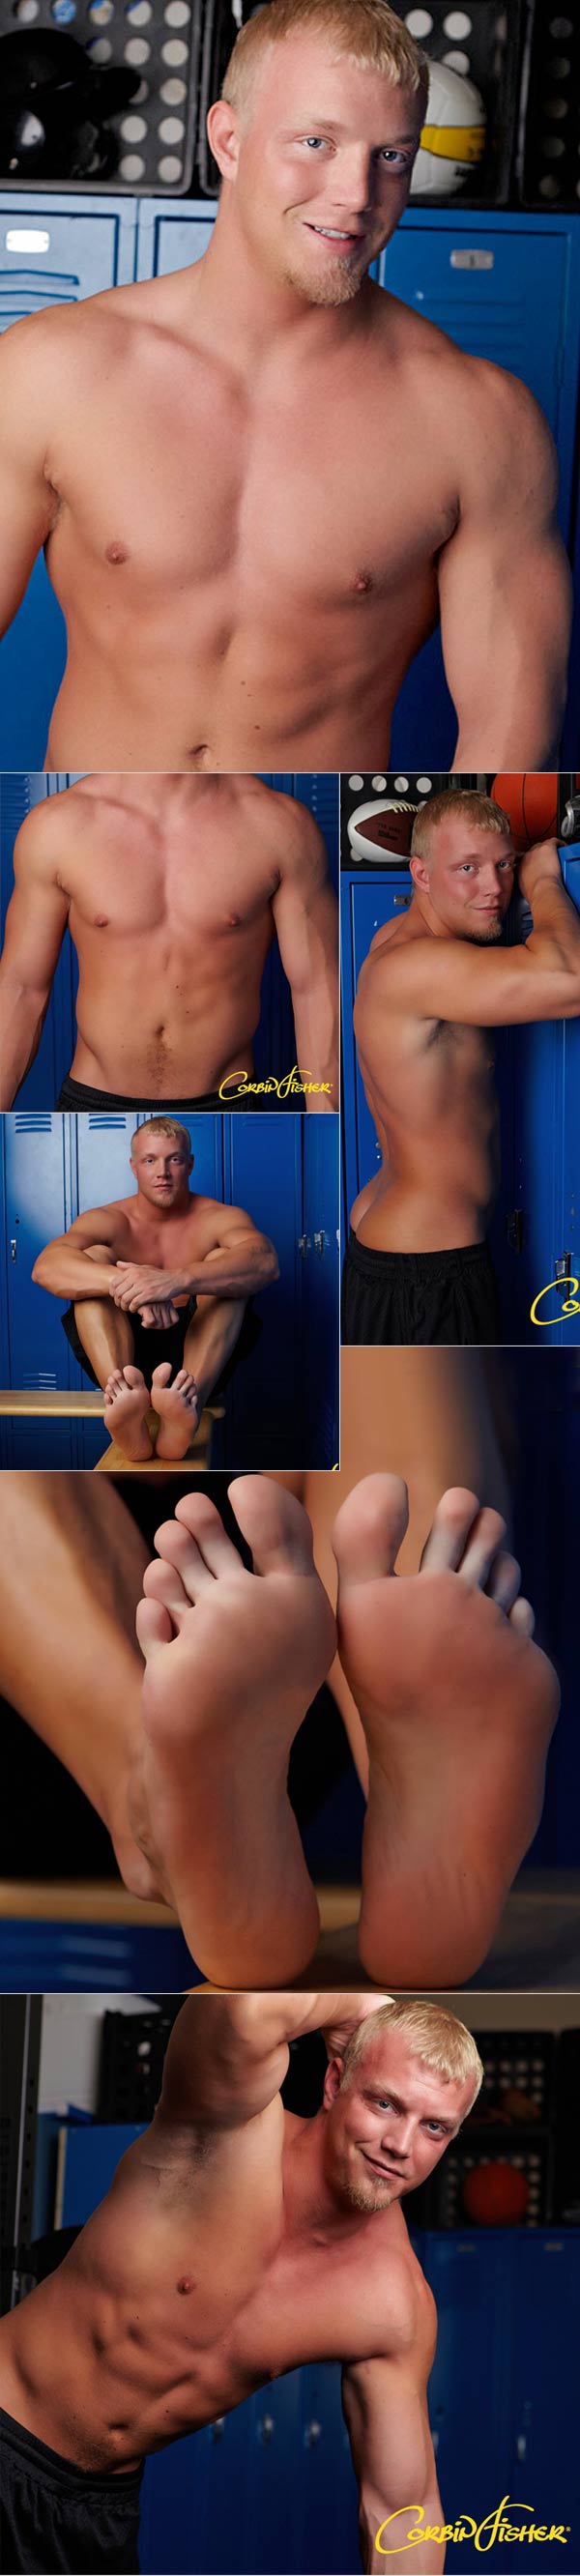 Steve (Pumps One Out) at CorbinFisher